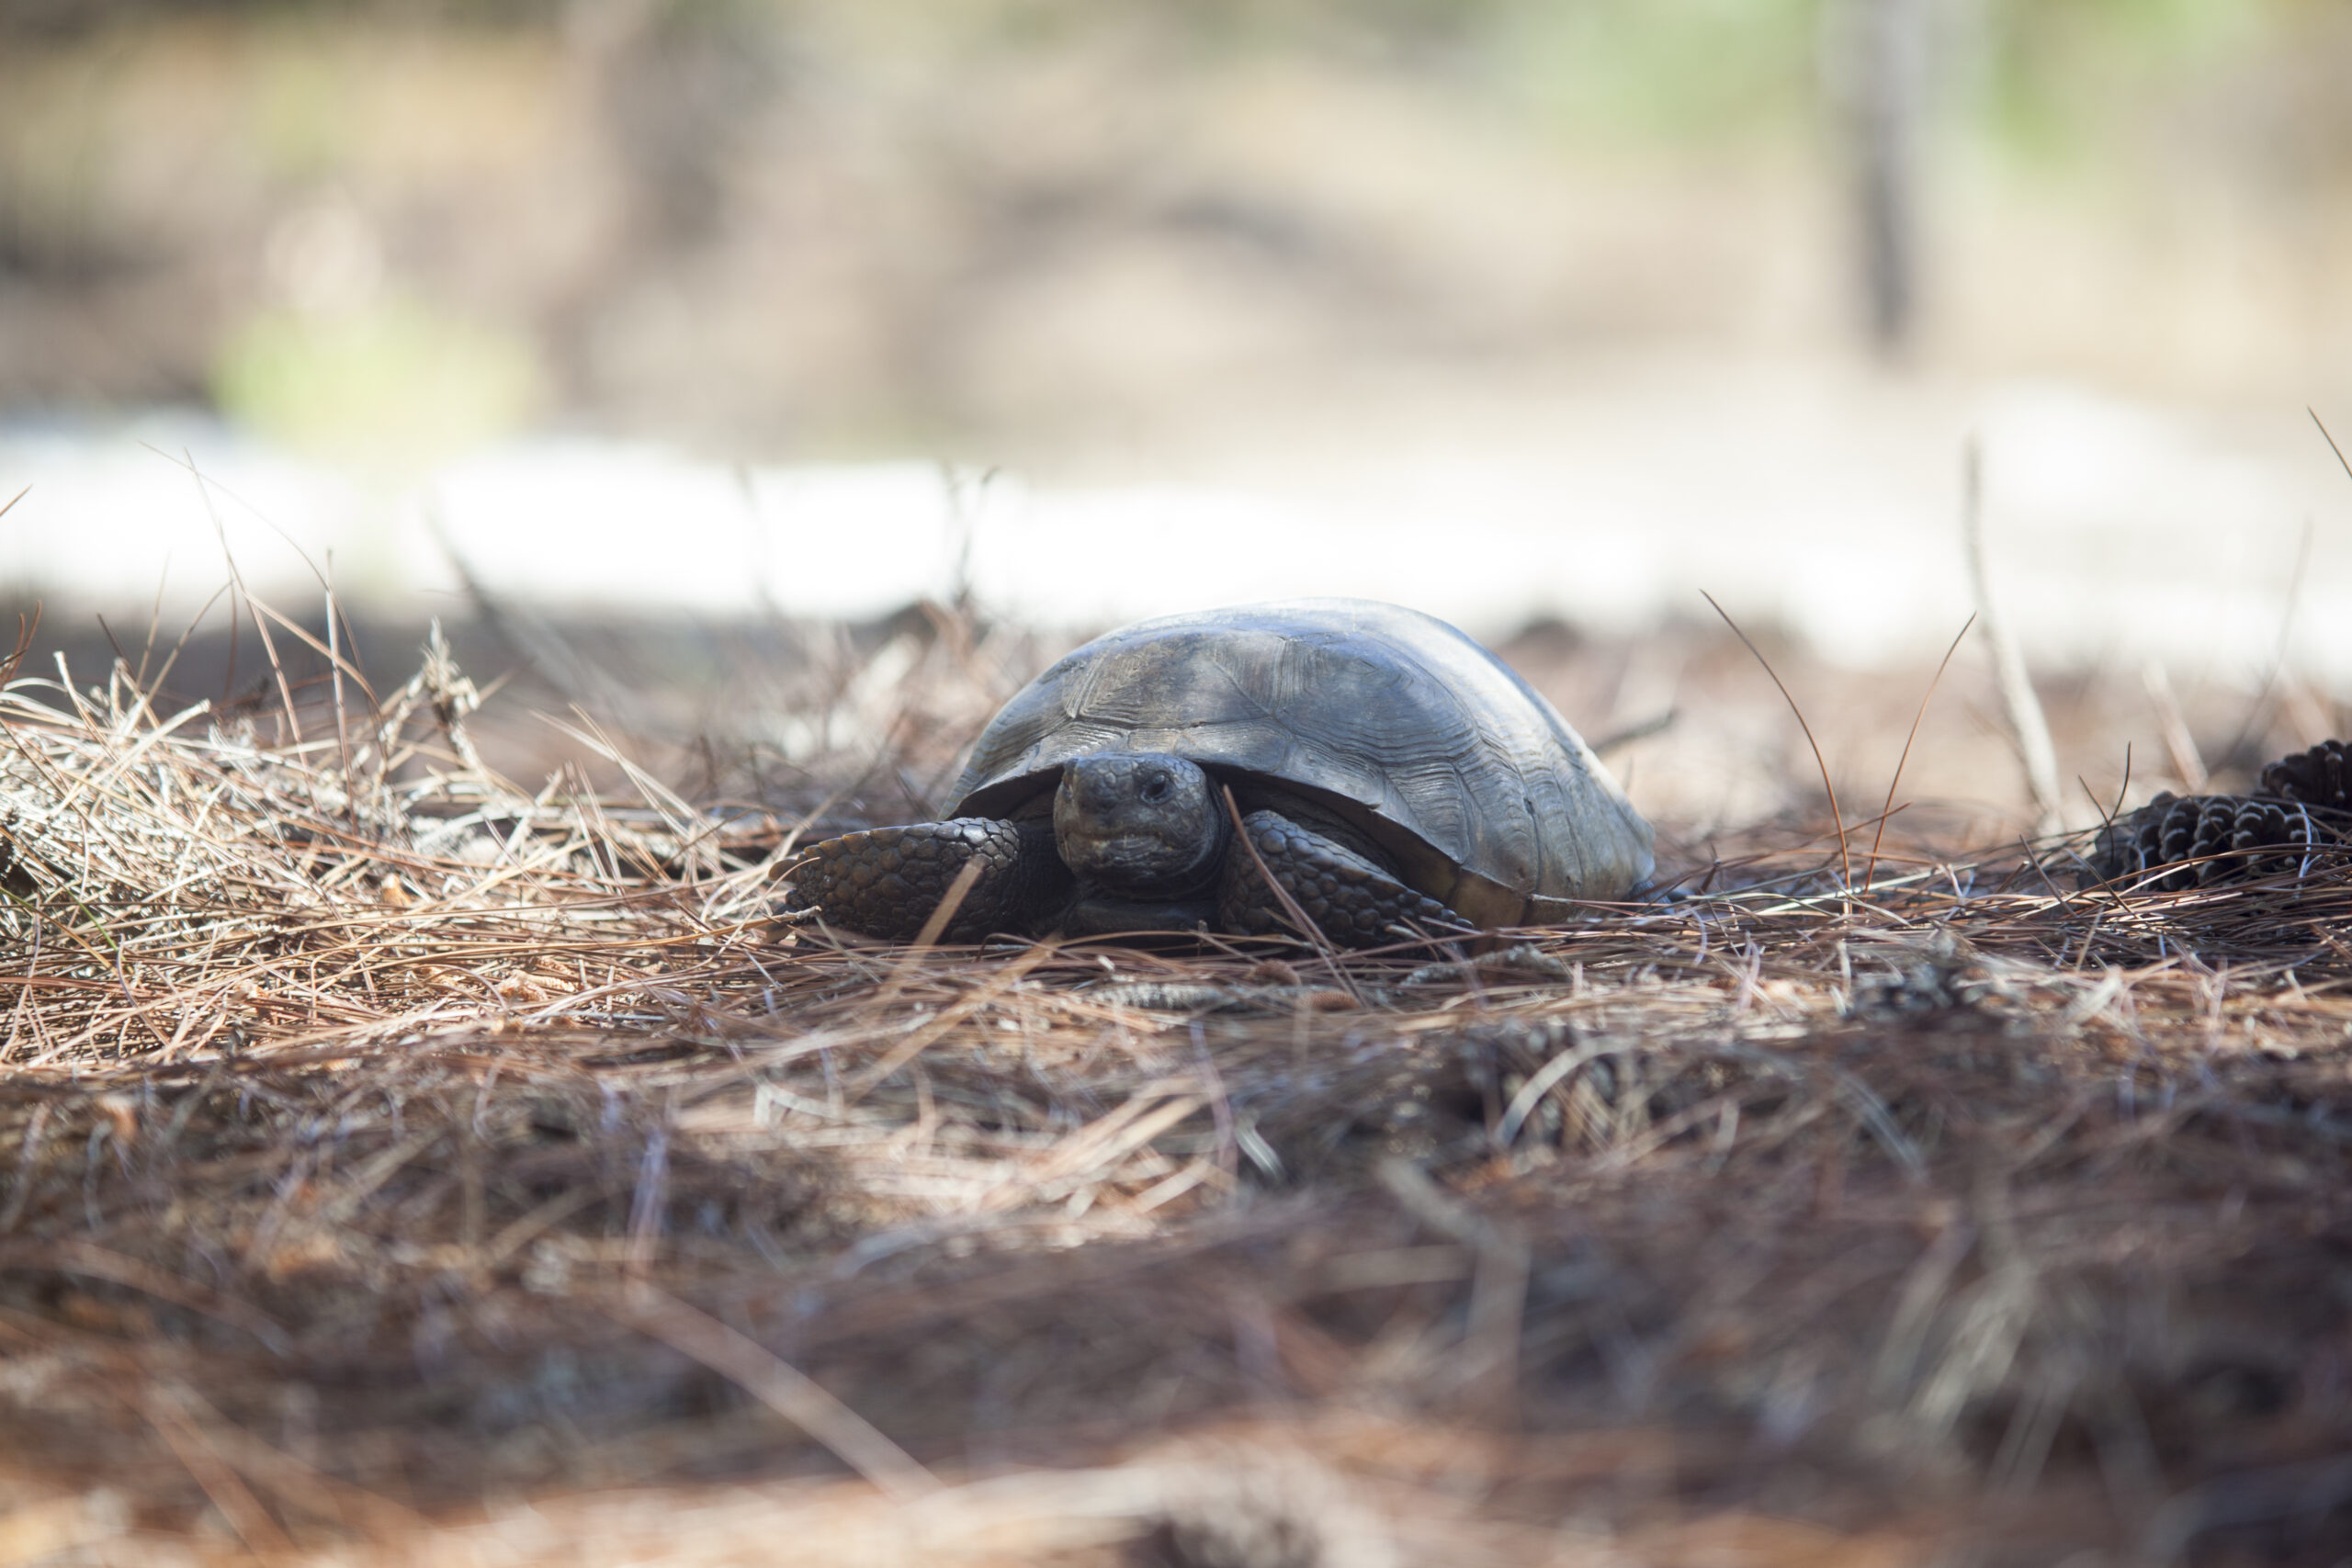 a gopher tortoise rests on pine needles-biomass-impacts